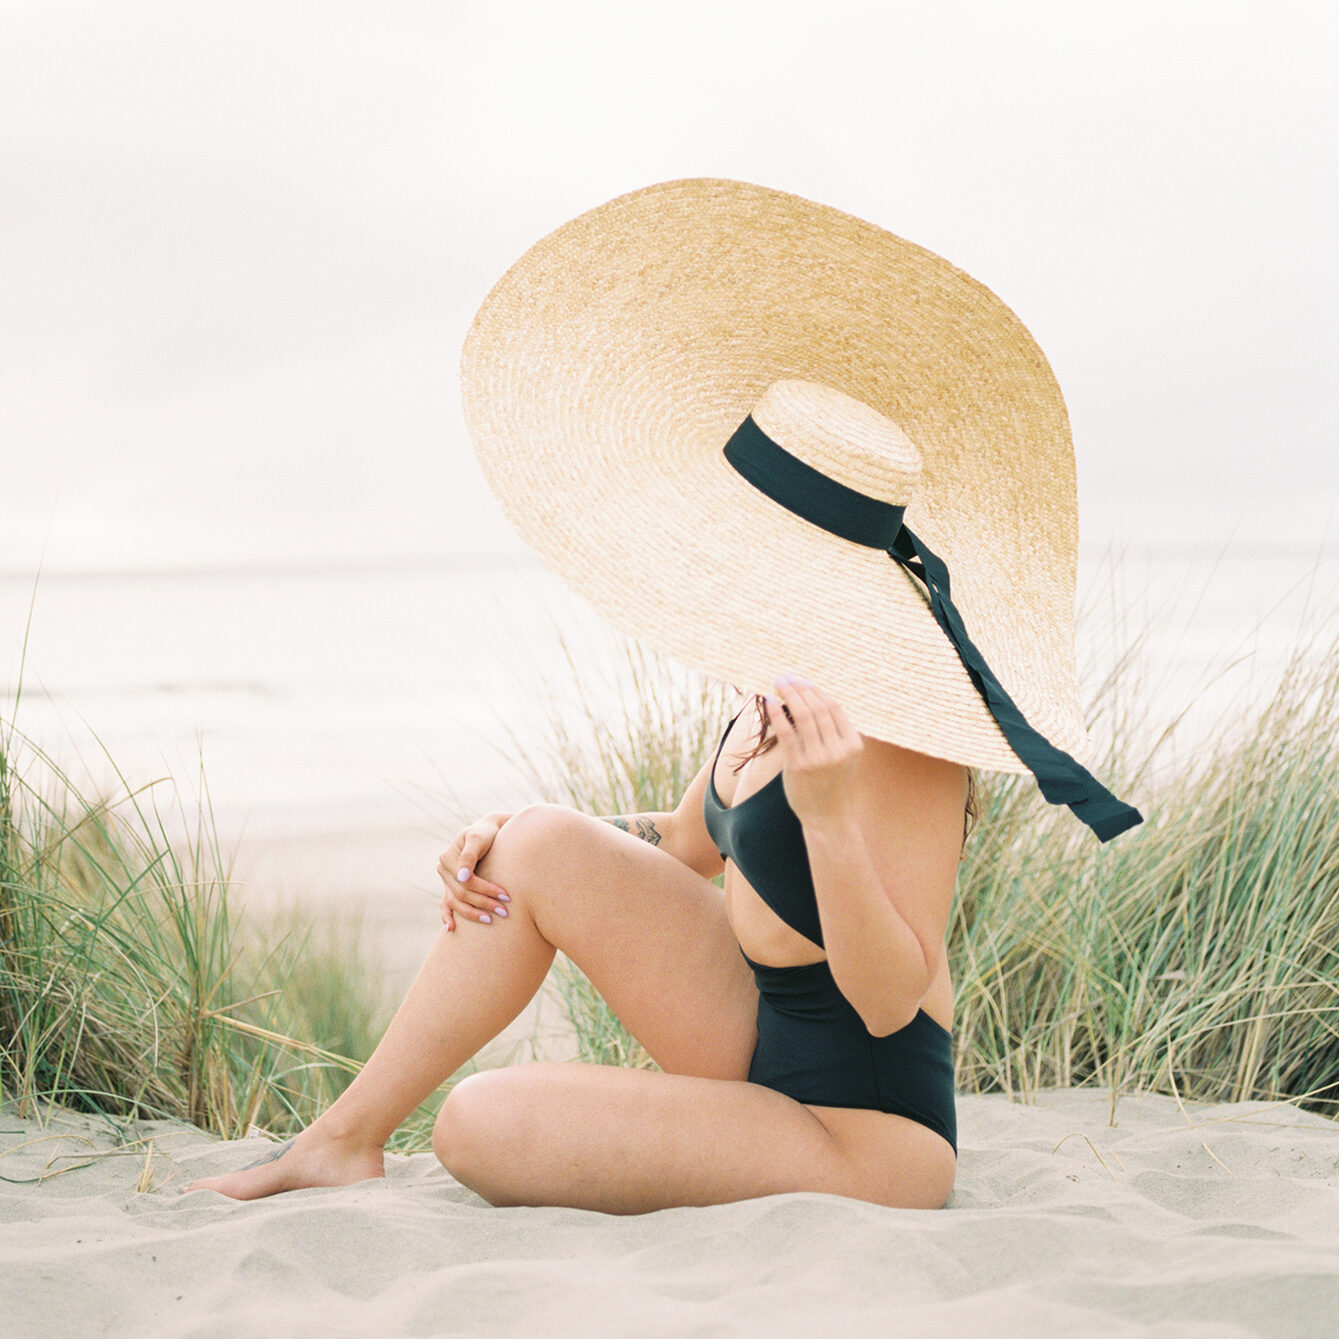 skincare tips for summer - wearing a hat at the beach